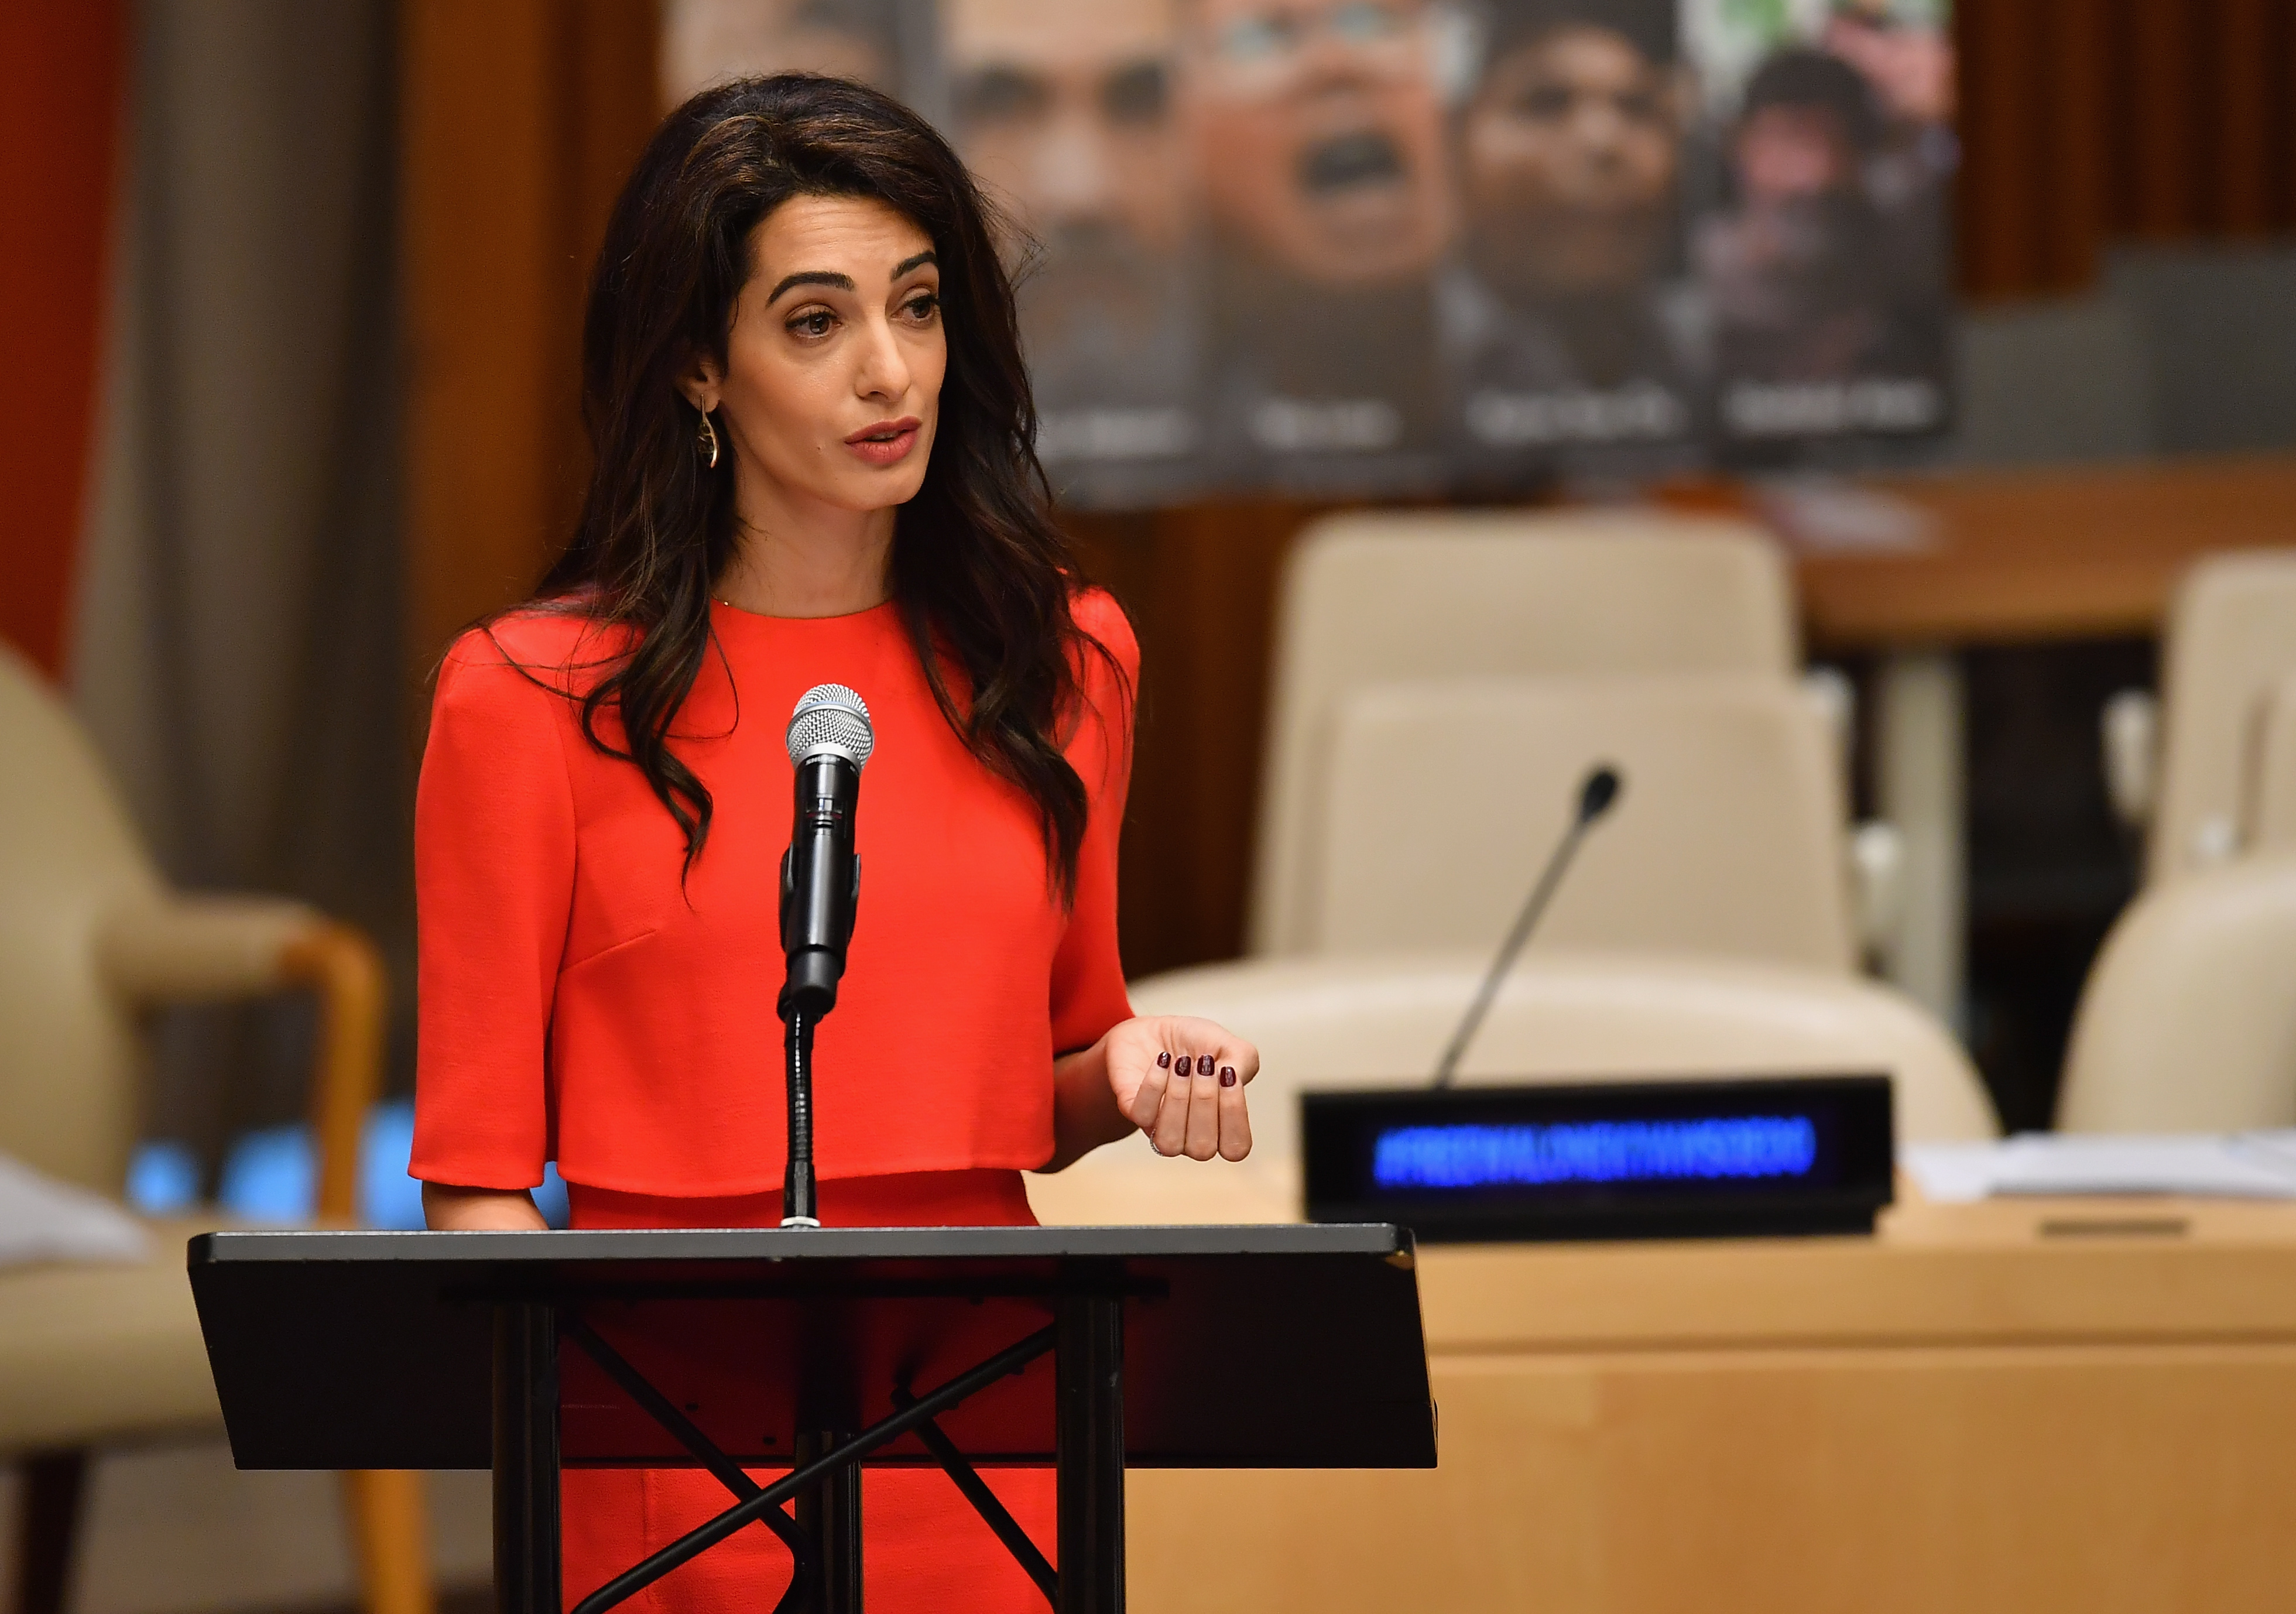 Amal Clooney speaks about journalists imprisoned in Myanmar at the Press Behind Bars: Undermining Justice and Democracy event during the 73rd session of the United Nations General Assembly at the United Nations in New York on Sept. 28, 2018. (Angela Weiss—AFP/Getty Images)